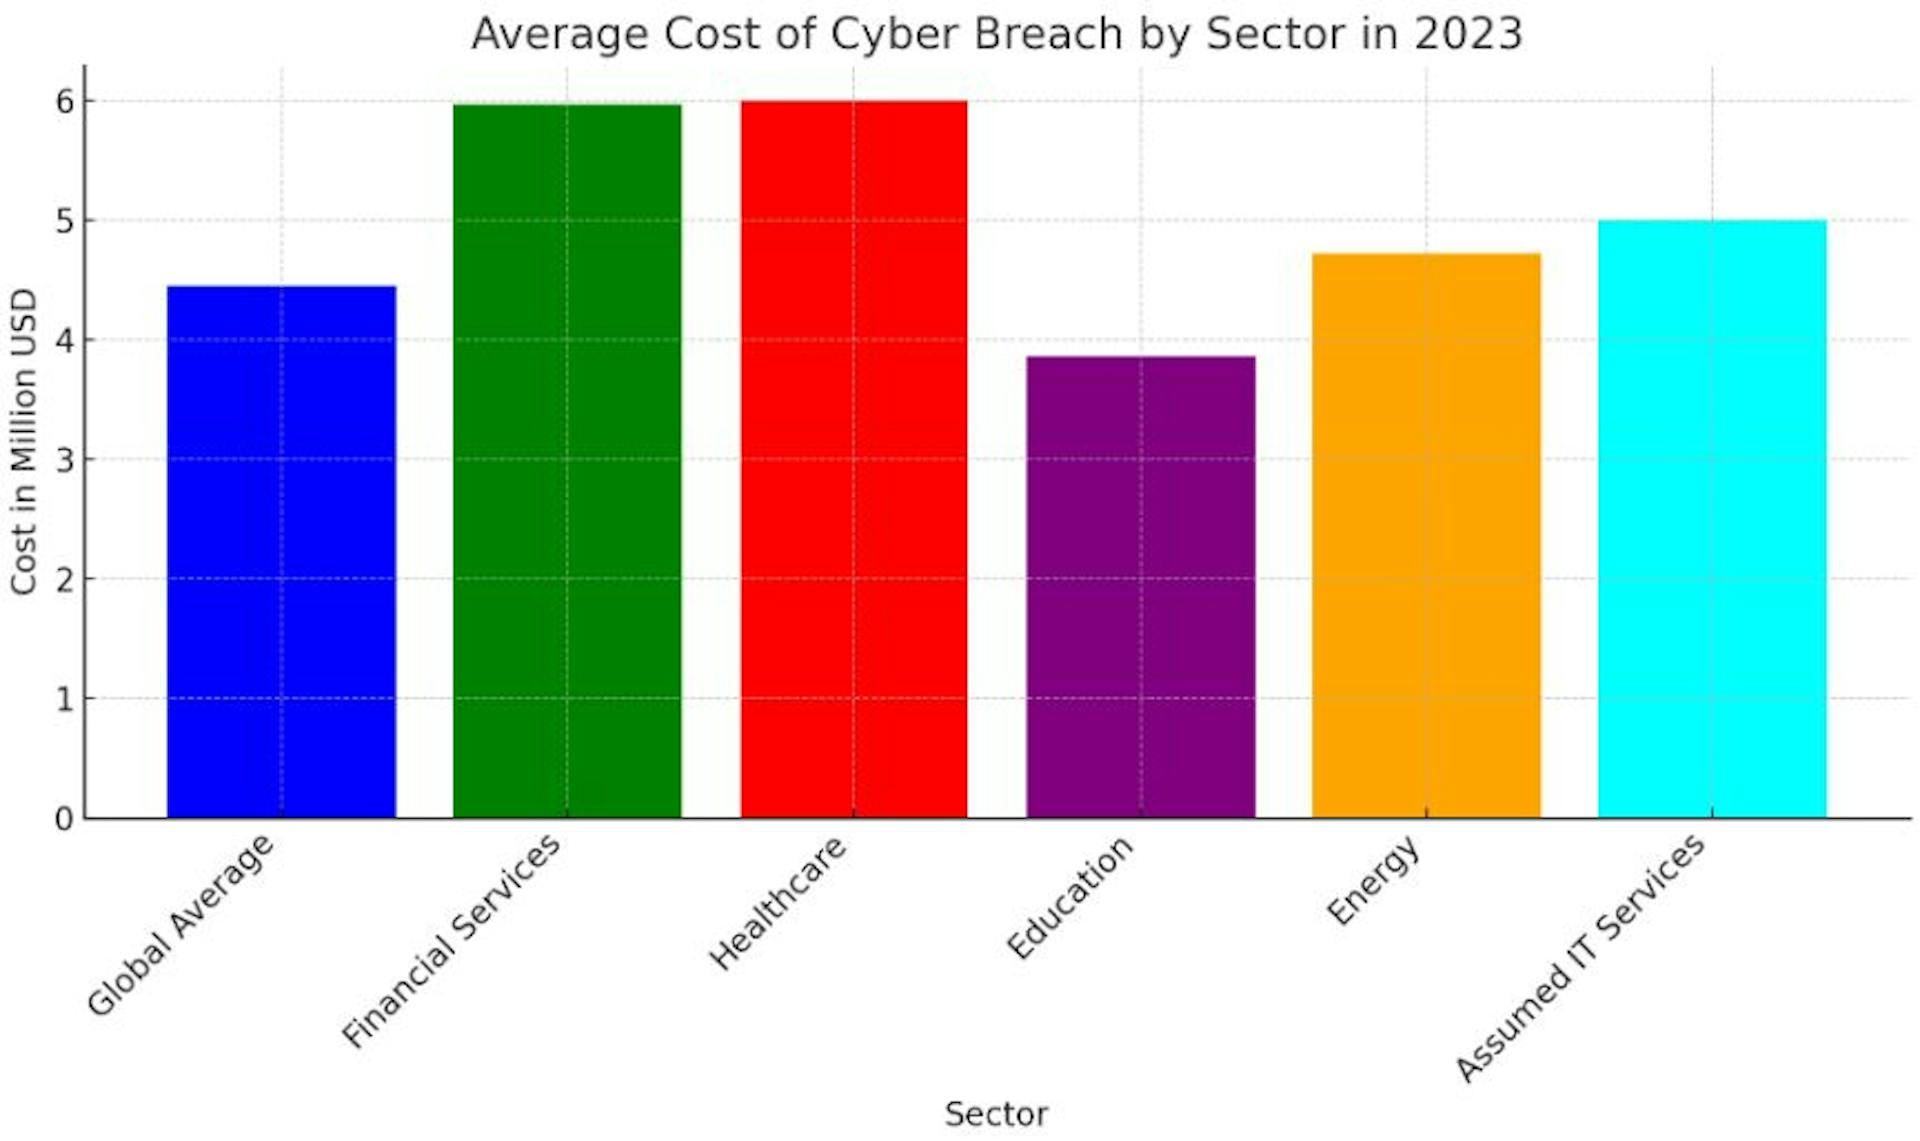  Illustrating the average cost of a cyber breach by sector in 2023. The chart sets the base with the global average and includes specific sectors such as financial services, healthcare, education, energy, and an assumed average for IT services. This visualization helps in understanding the financial impact across different sectors due to cyber breaches.